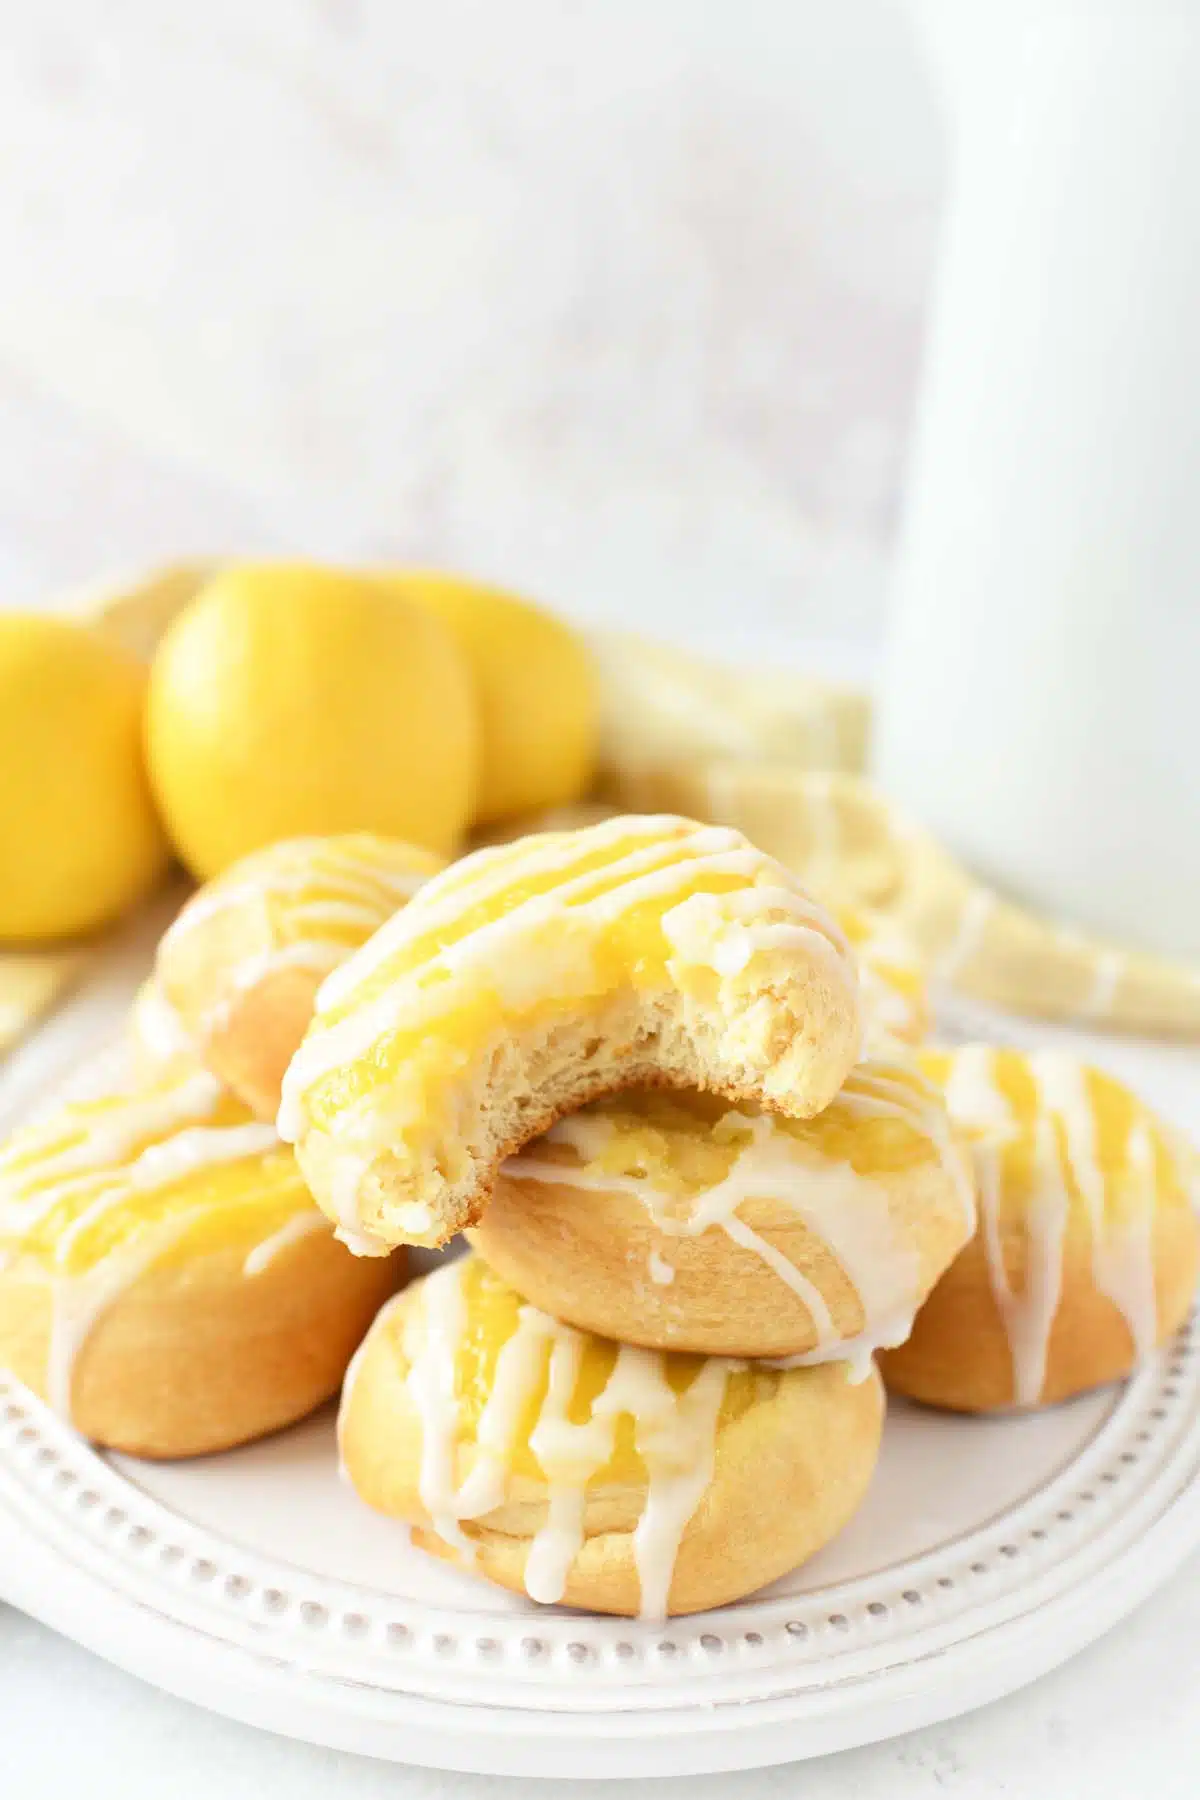 Lemon Danish with a bite taken out of one stacked on a plate.